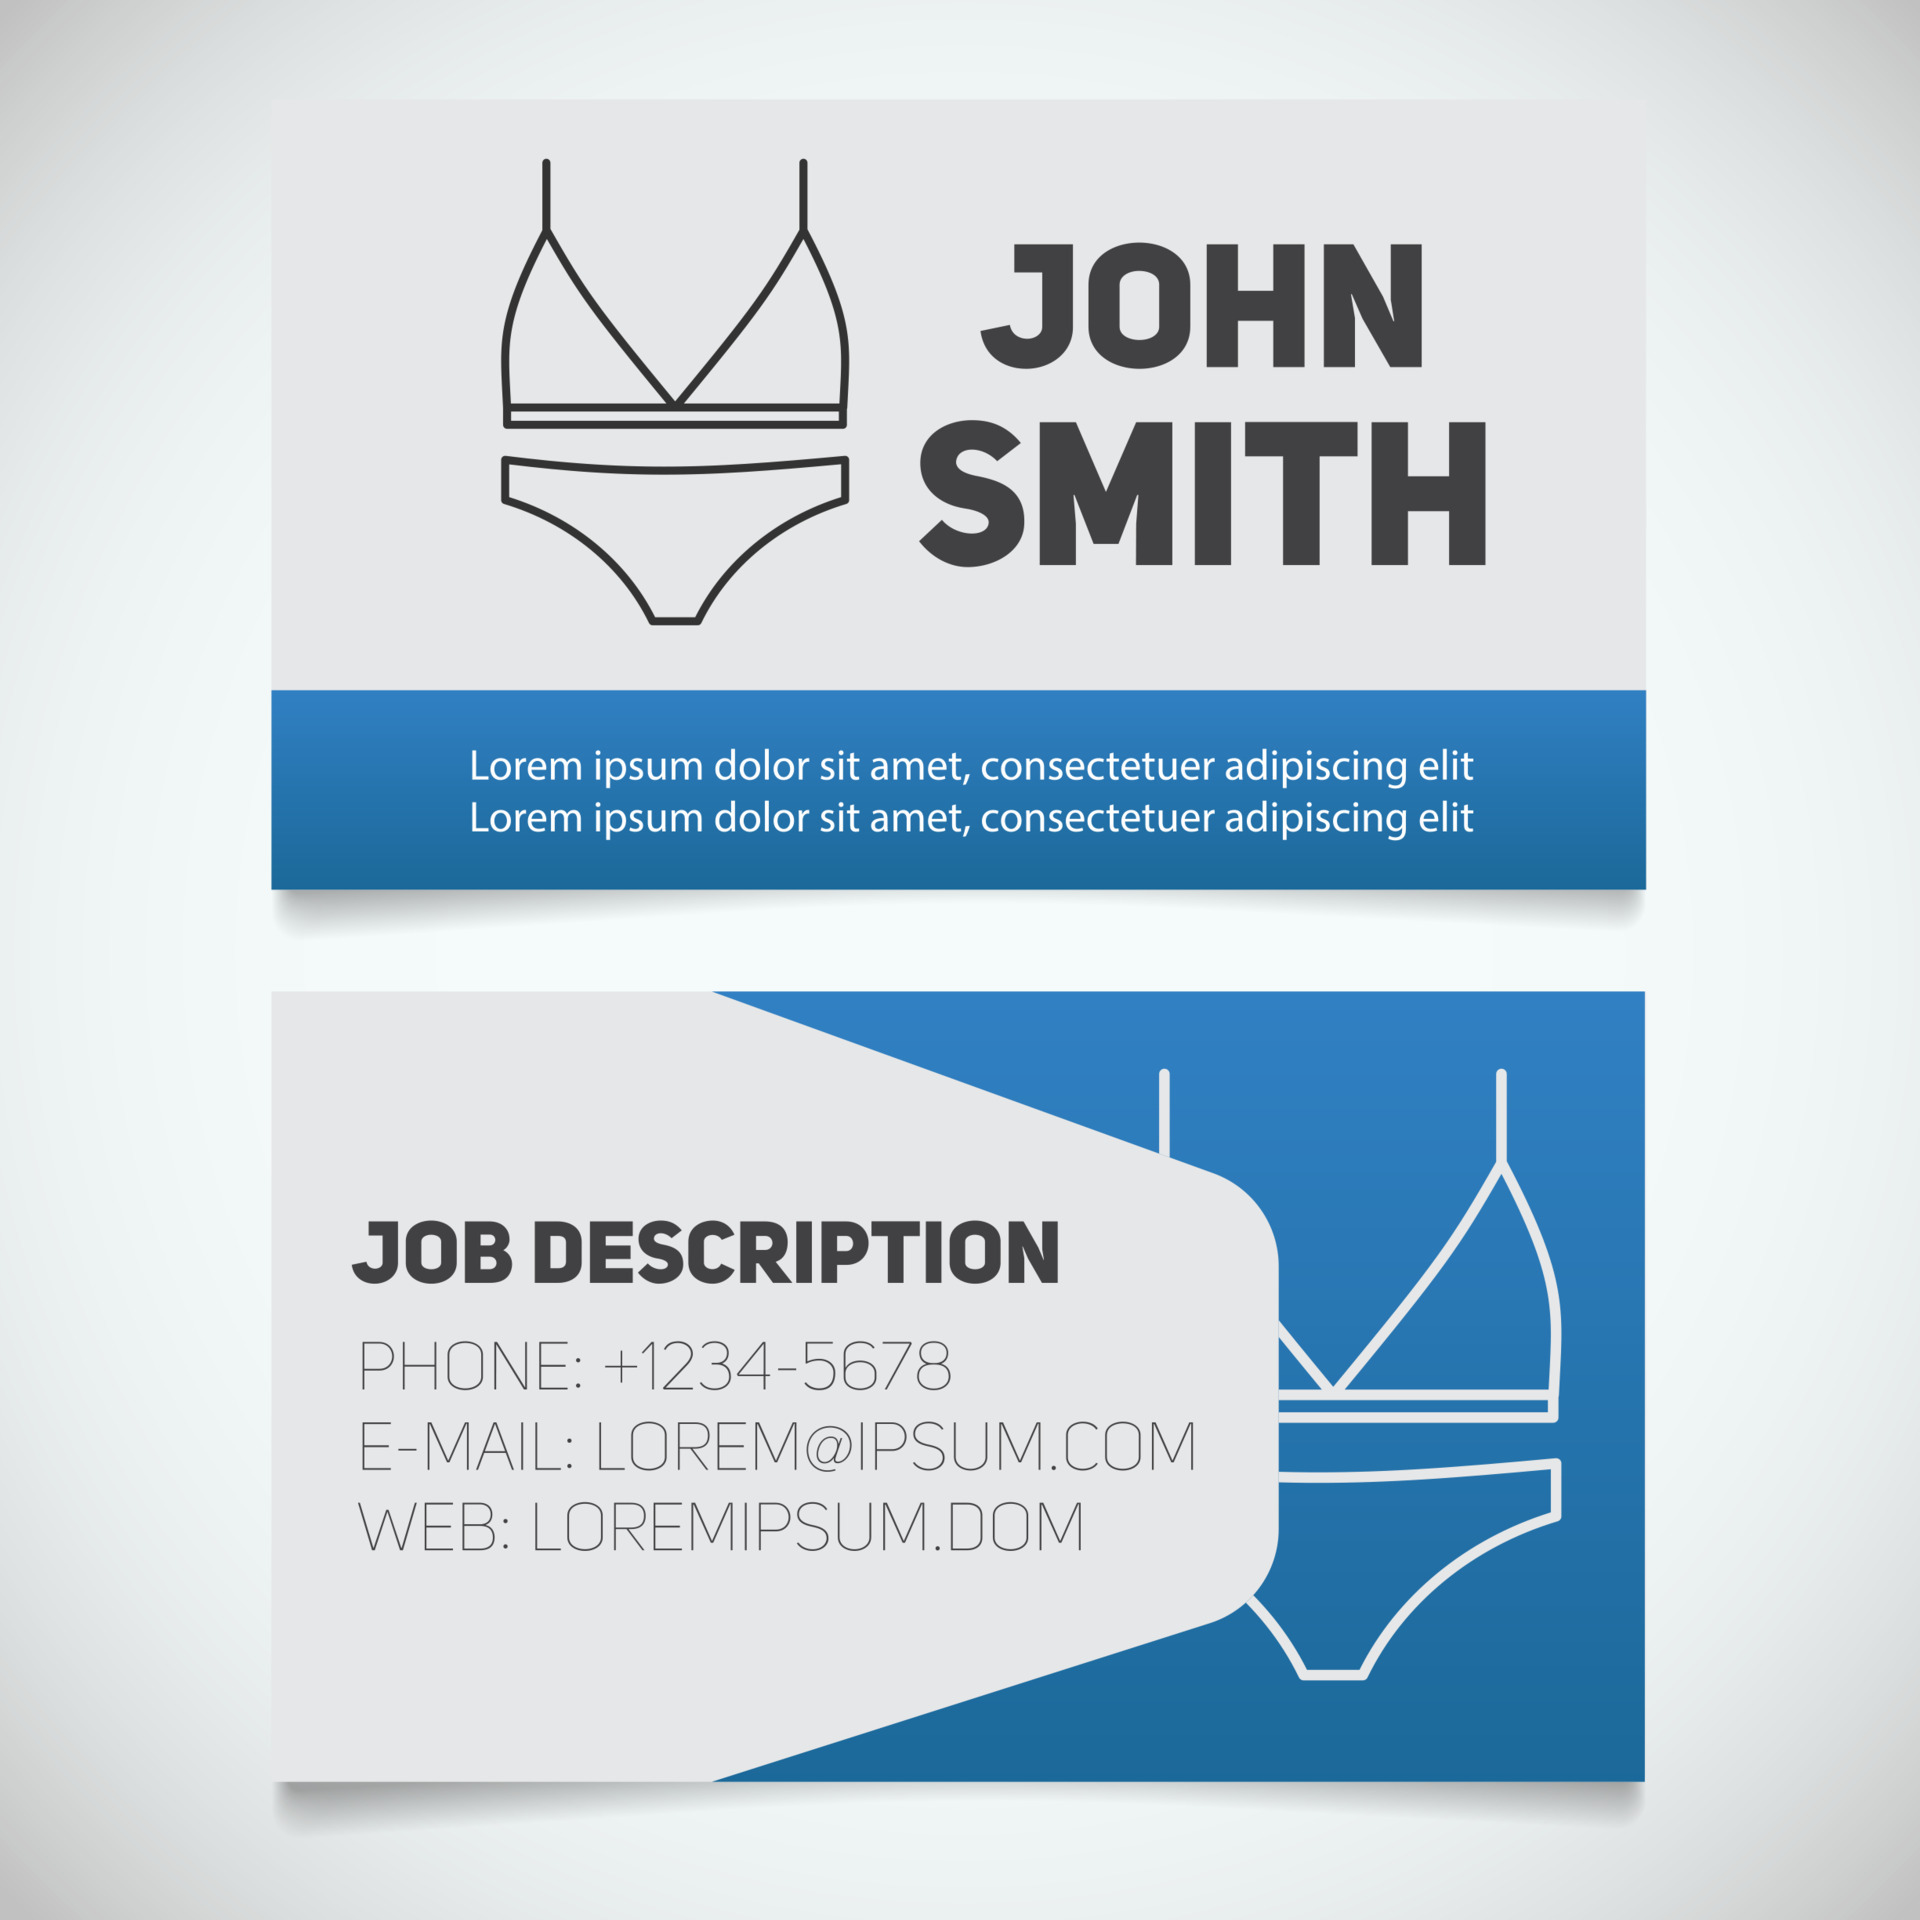 Business card print template with bra and panties logo. Women's